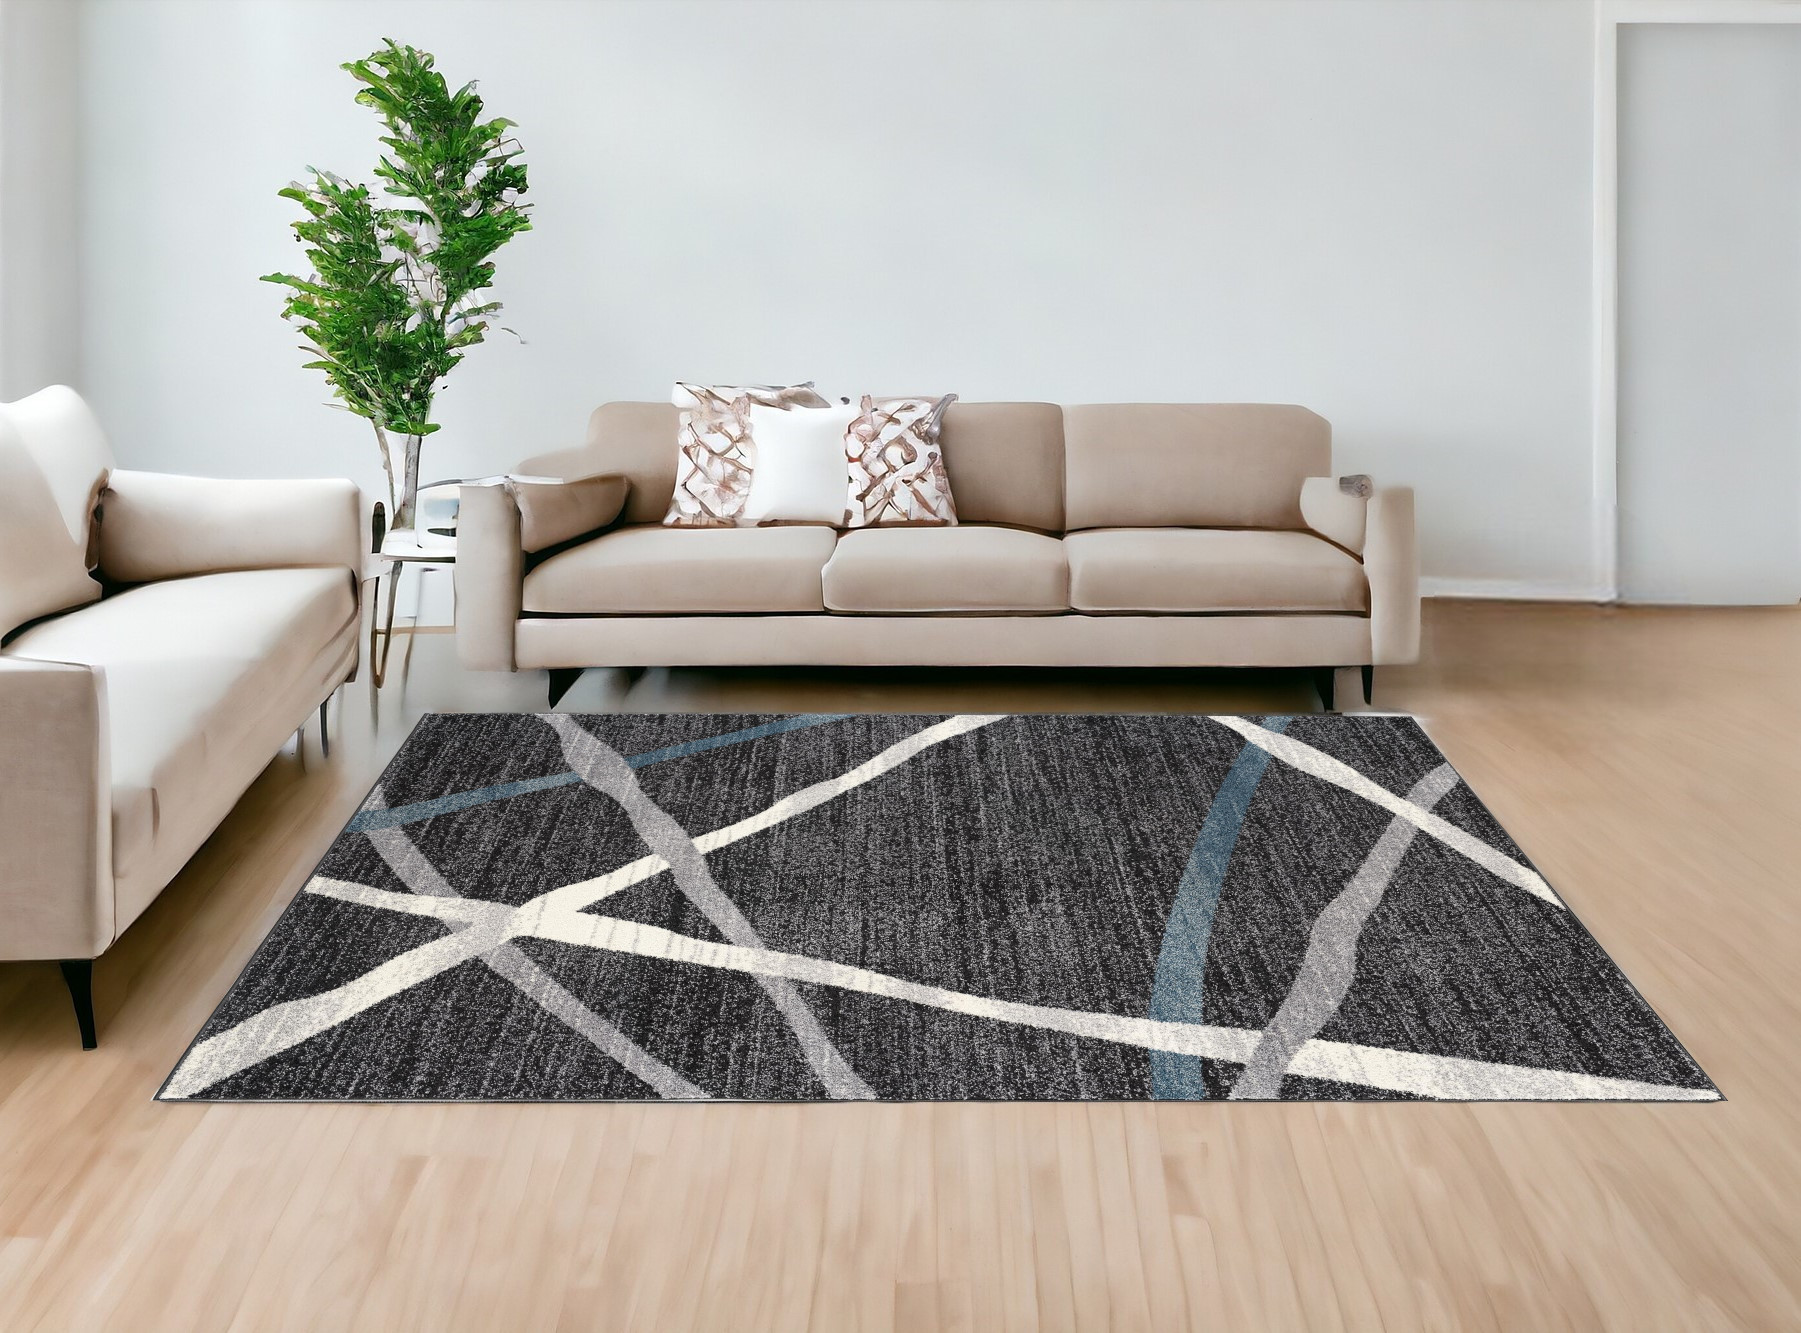 7’ X 9’ Distressed Black And Gray Abstract Area Rug-390311-1